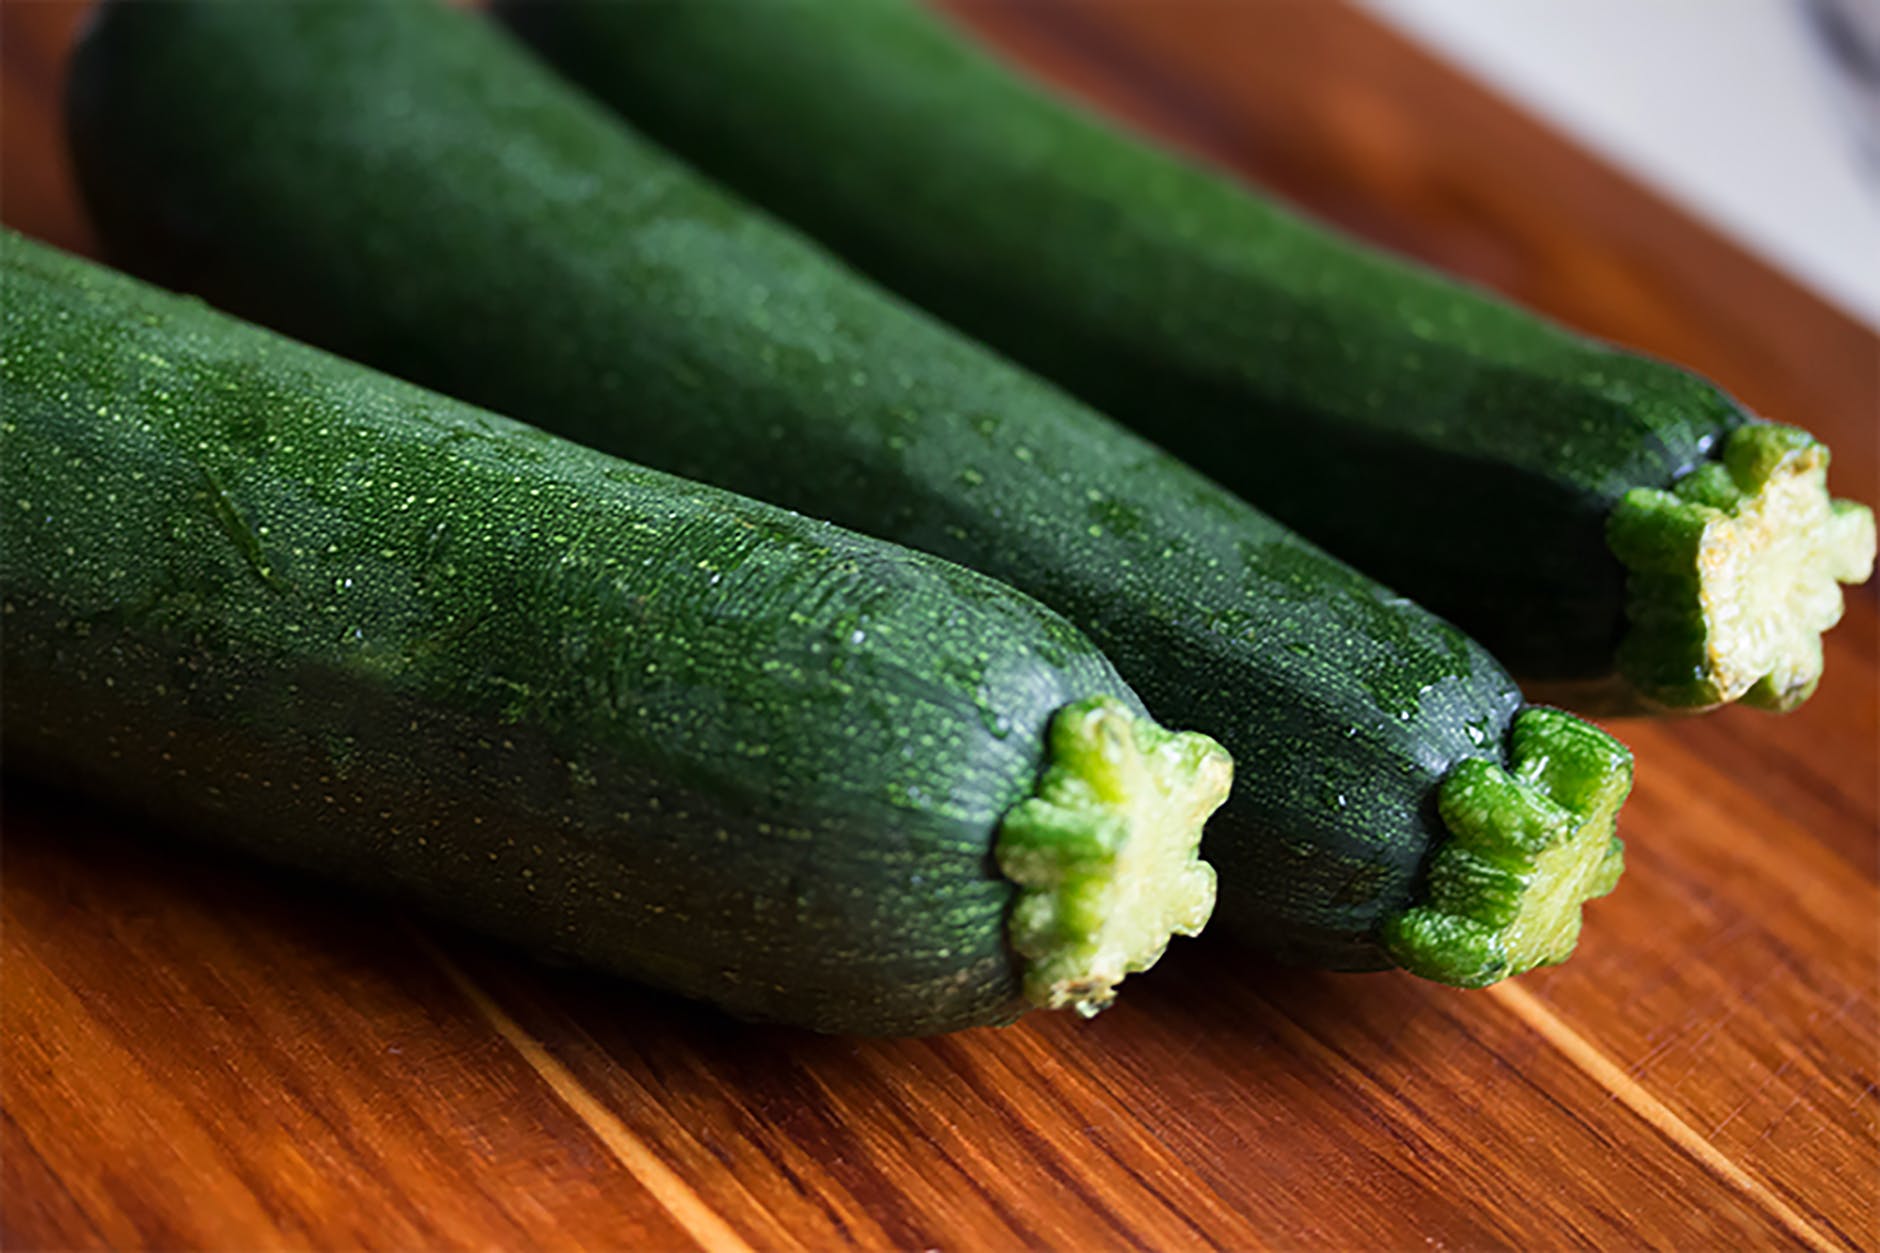 How to use cucumber for body care.